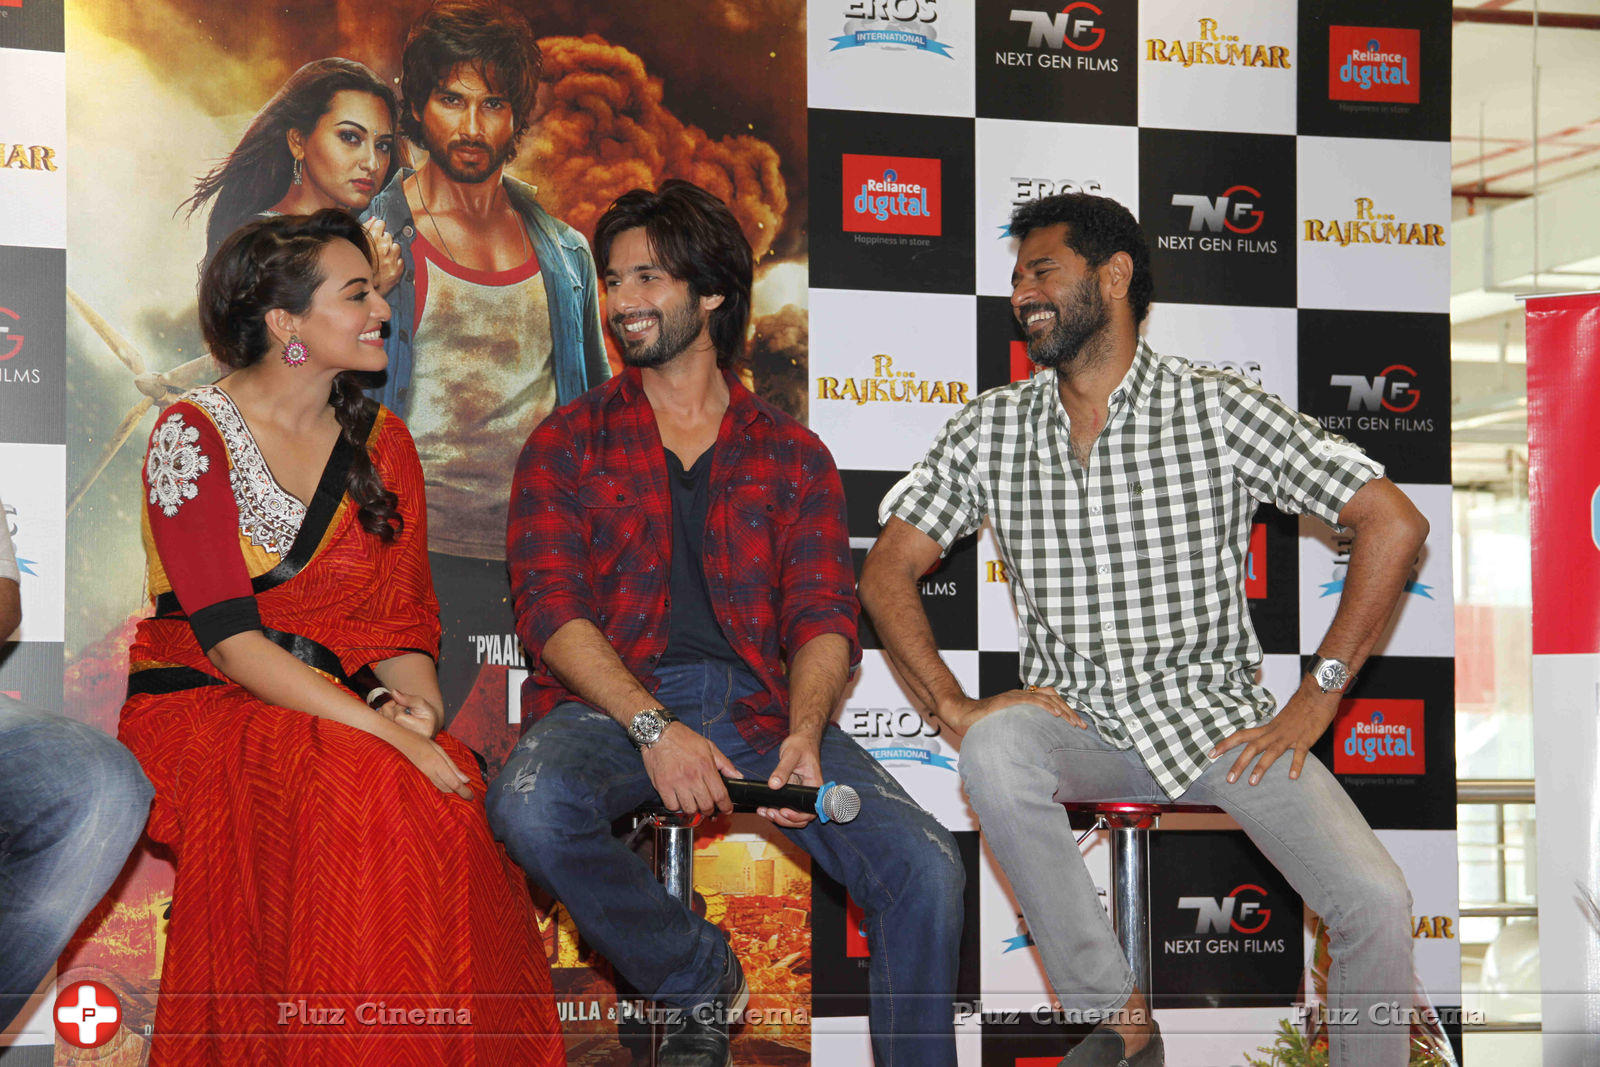 Shahid and Sonakshi Promote R Rajkumar at Reliance Digital Photos | Picture 657597